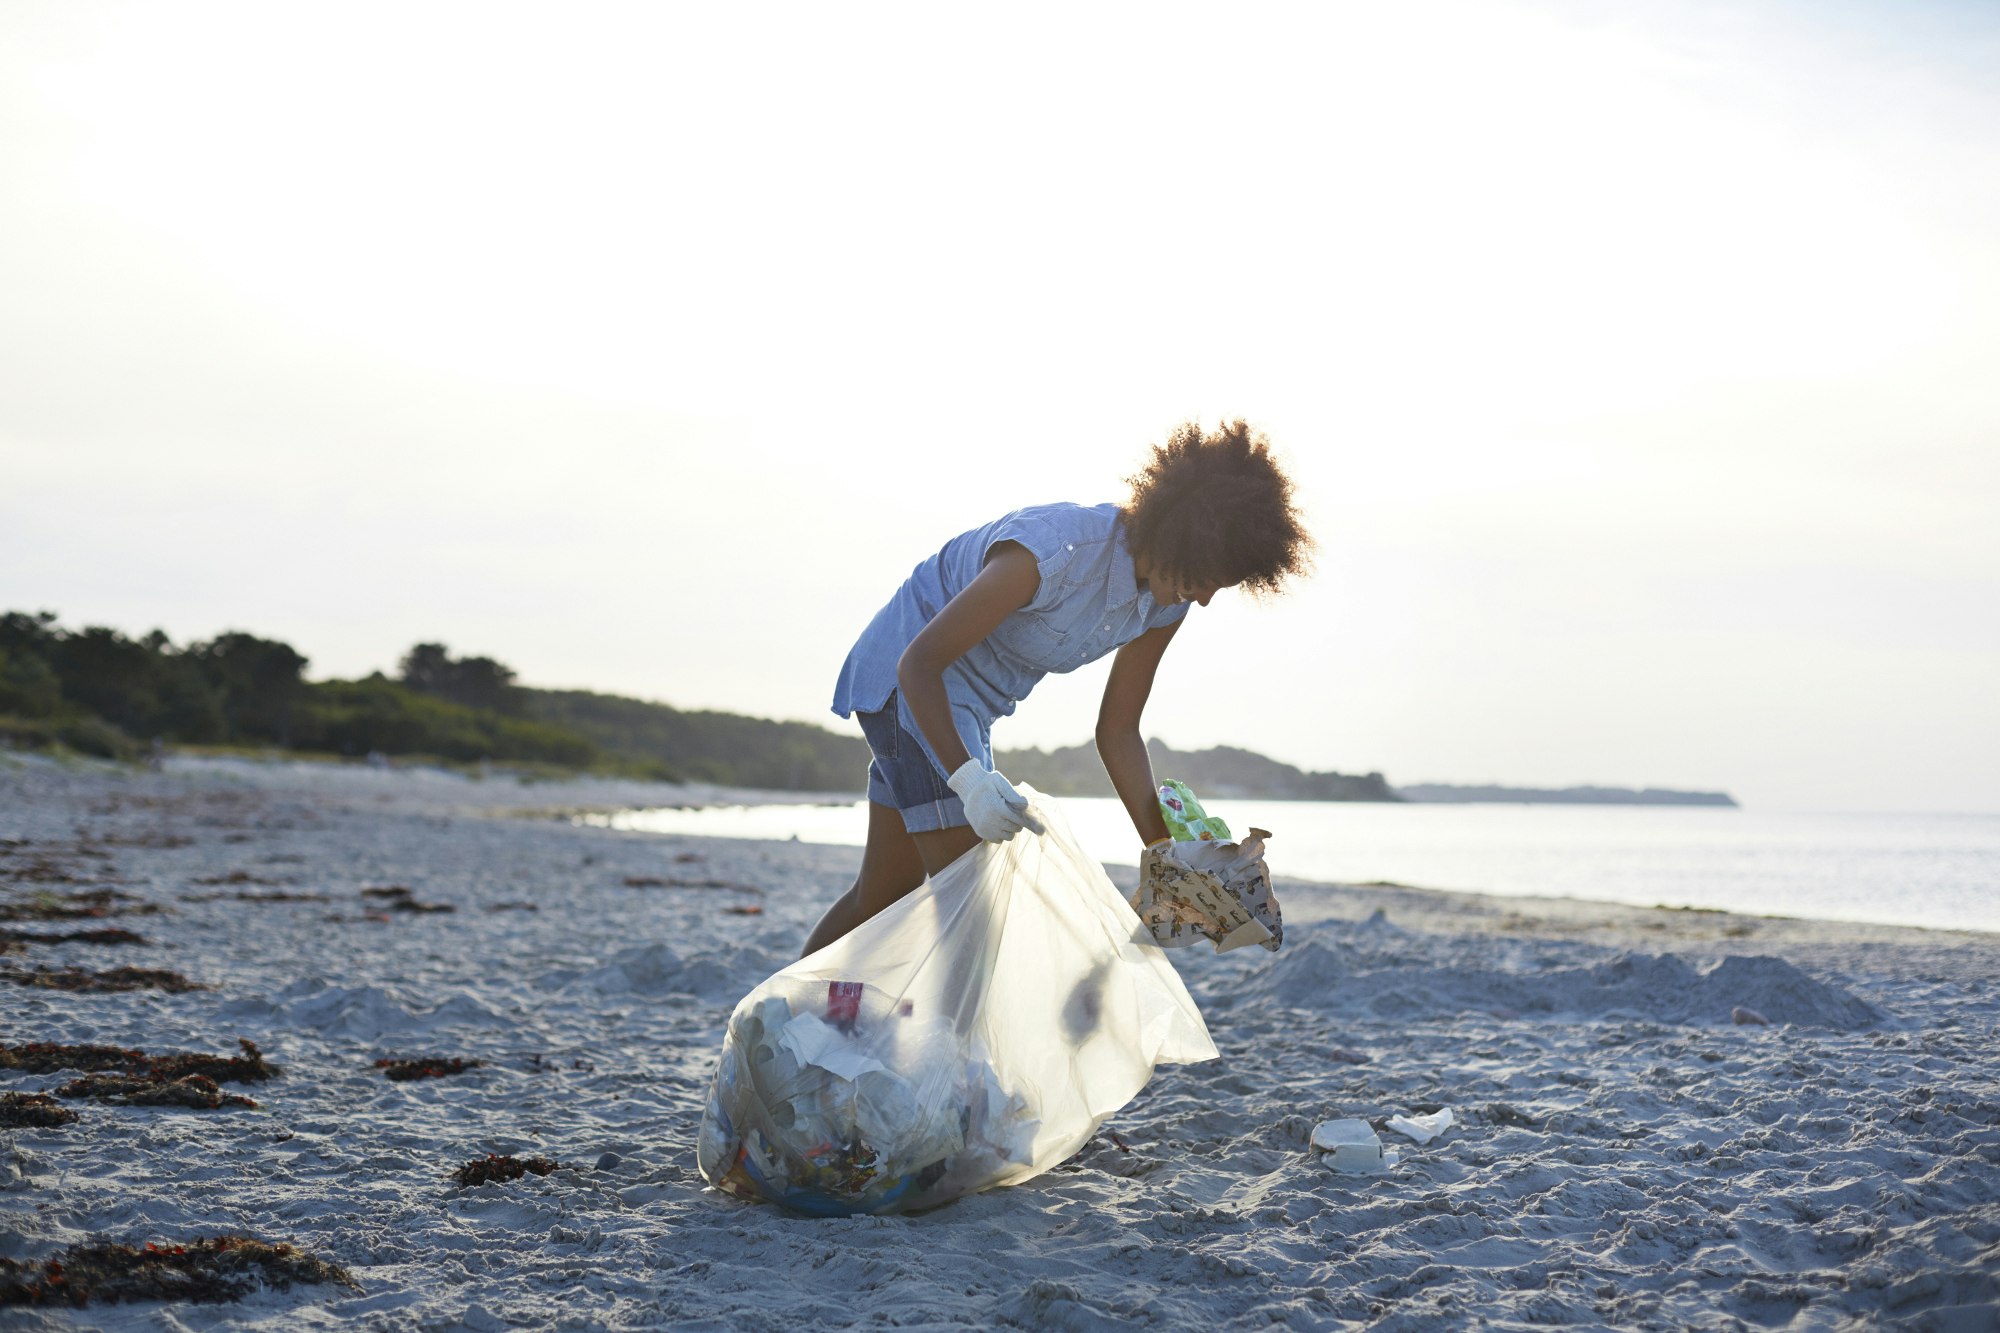 A woman cleans up litter and rubbish on a beach